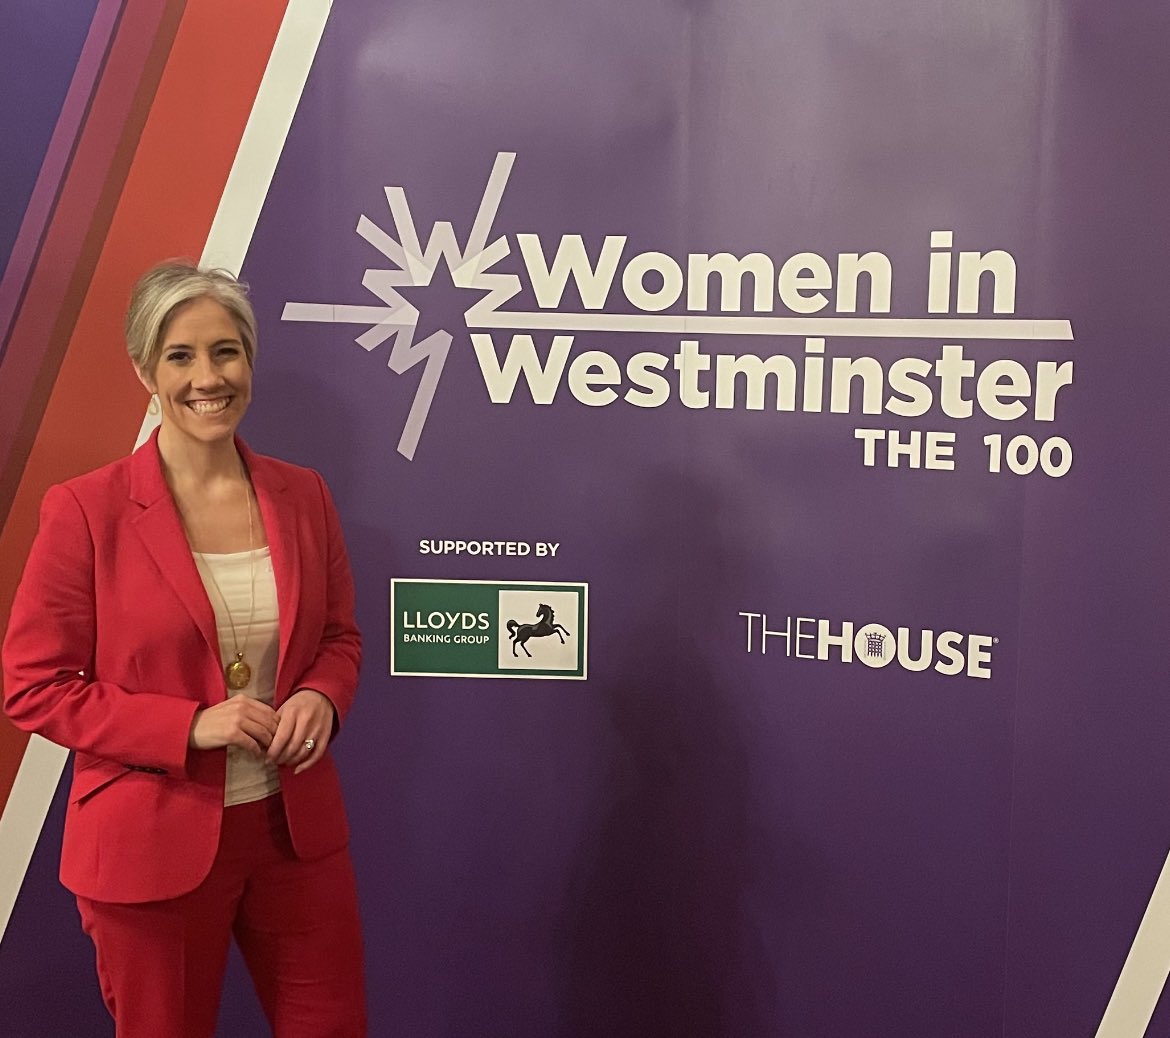 #RT @LibDems: RT @libdemdaisy: Third, I’m really chuffed to announce that I’m on this year’s Women in Westminster’s “Ones to Watch” list in the House magazine's #WiW100 issue, alongside brilliant women in public life, journalism and my fellow MPs
#Intern…